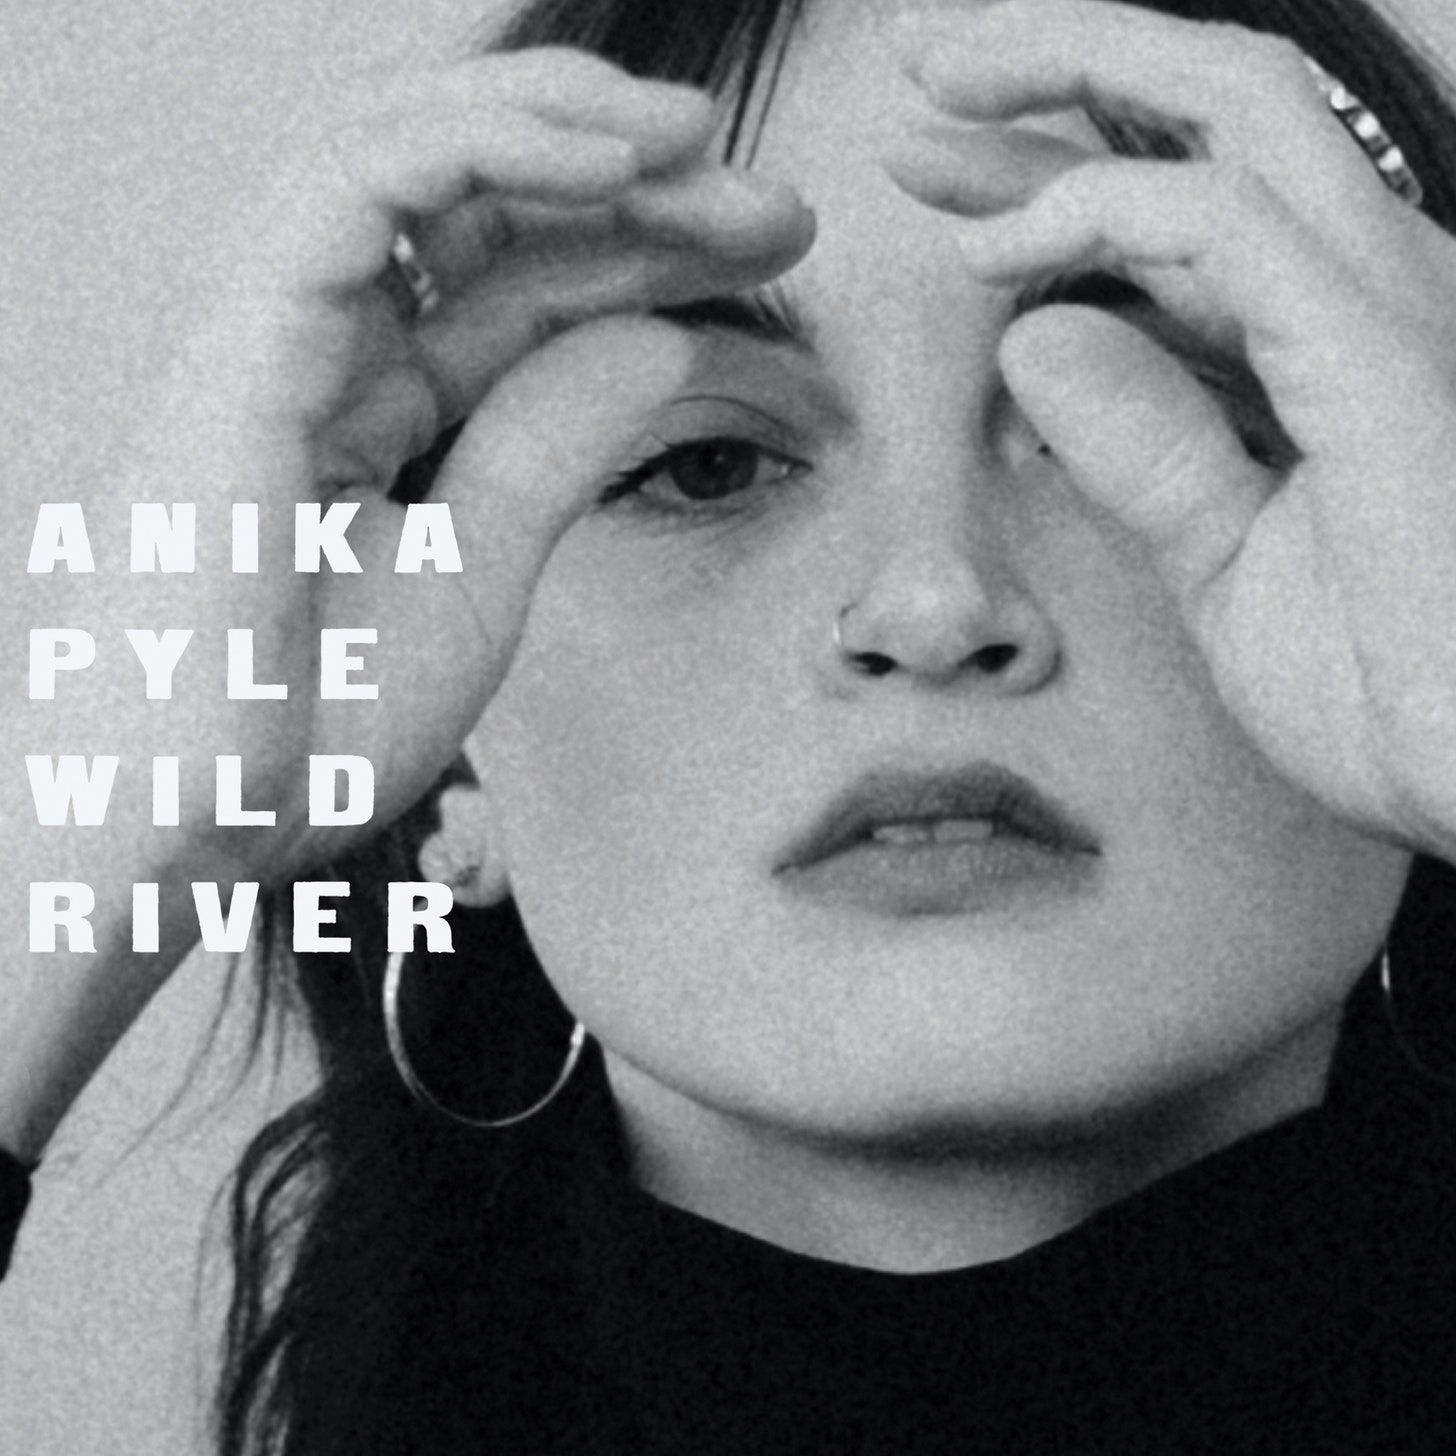 Talking With Anika Pyle About Death, Grief, and Her New Album